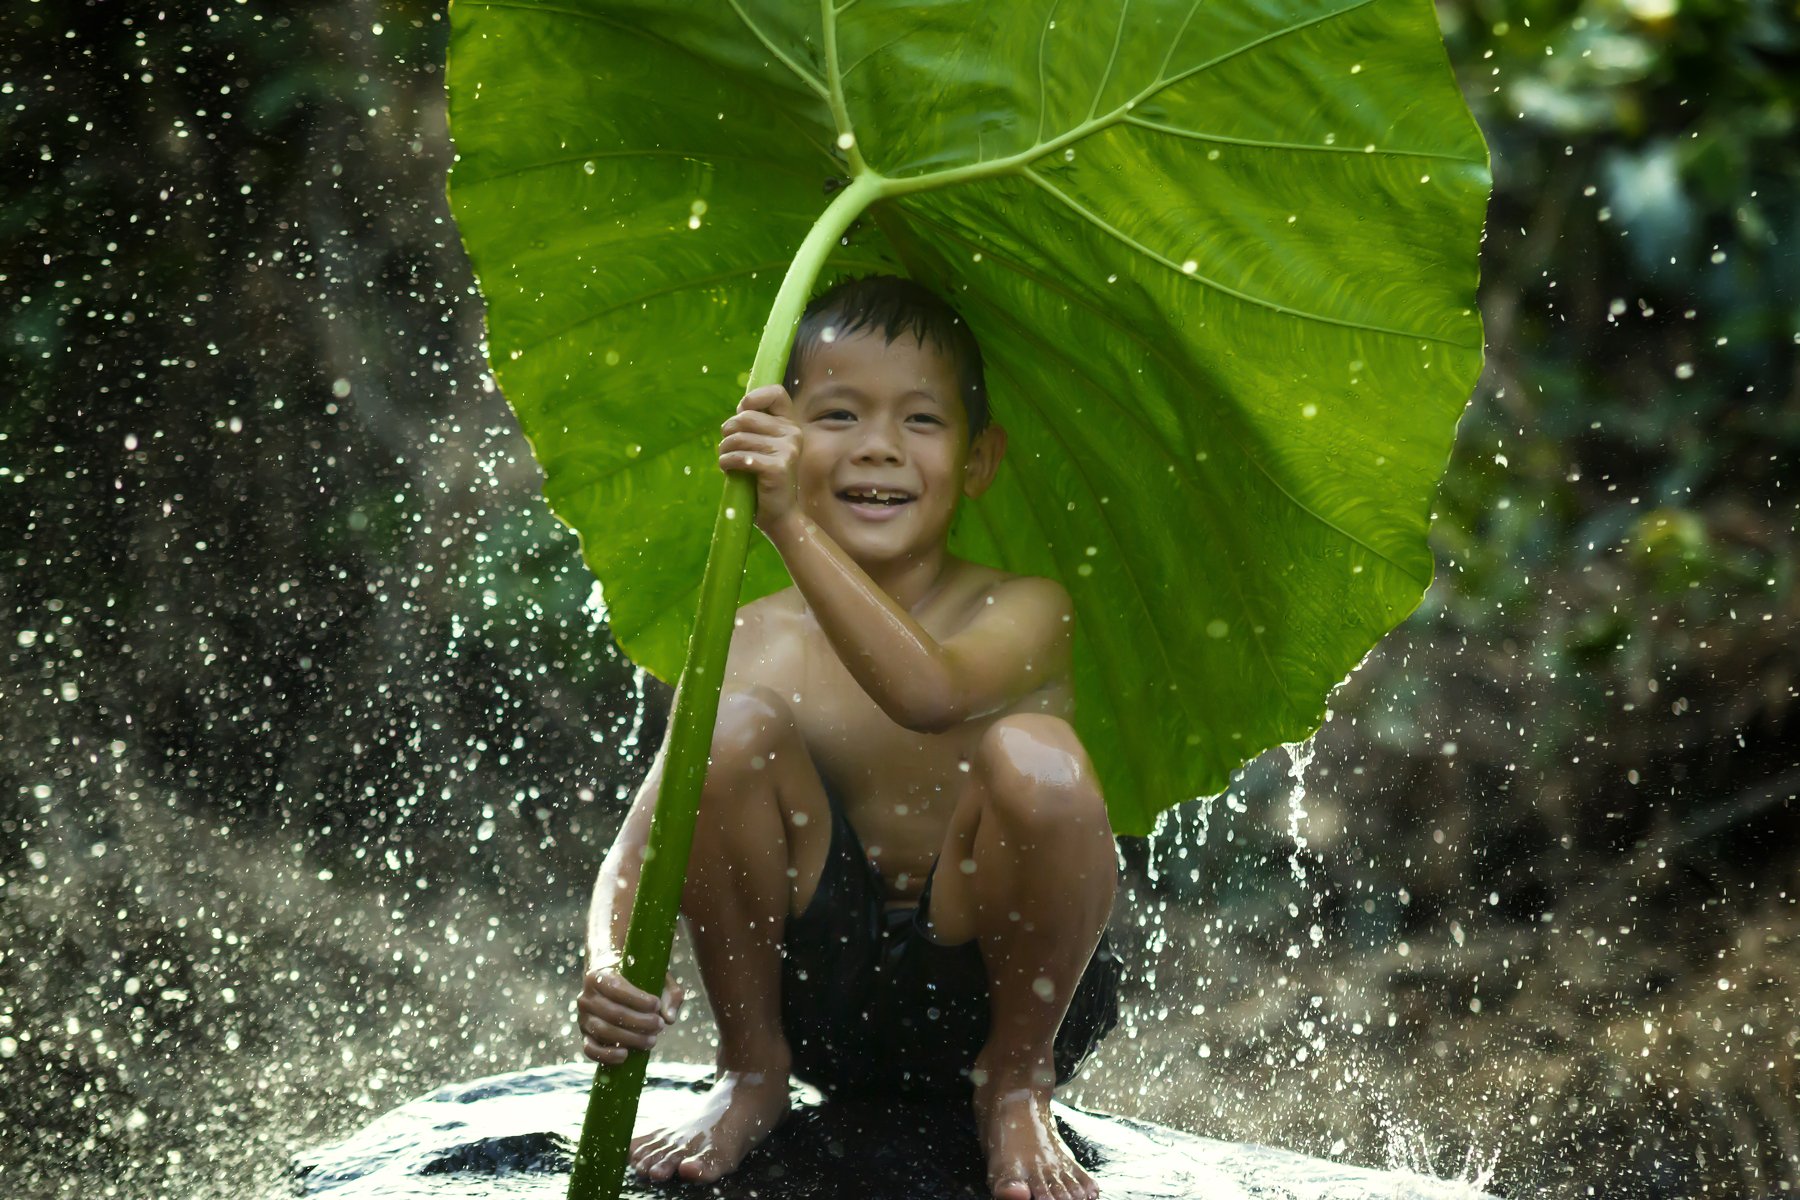 vietnam; kid; child; poor; rural; indonesia; water; thailand; enthusiasm; cambodia; splash; outdoor; fun; boy; myanmar; people; recreation; funny; local; strength; face; sunset; vacation; summertime; fantastic; expression; happiness; active; summer; cauca, Visoot Uthairam